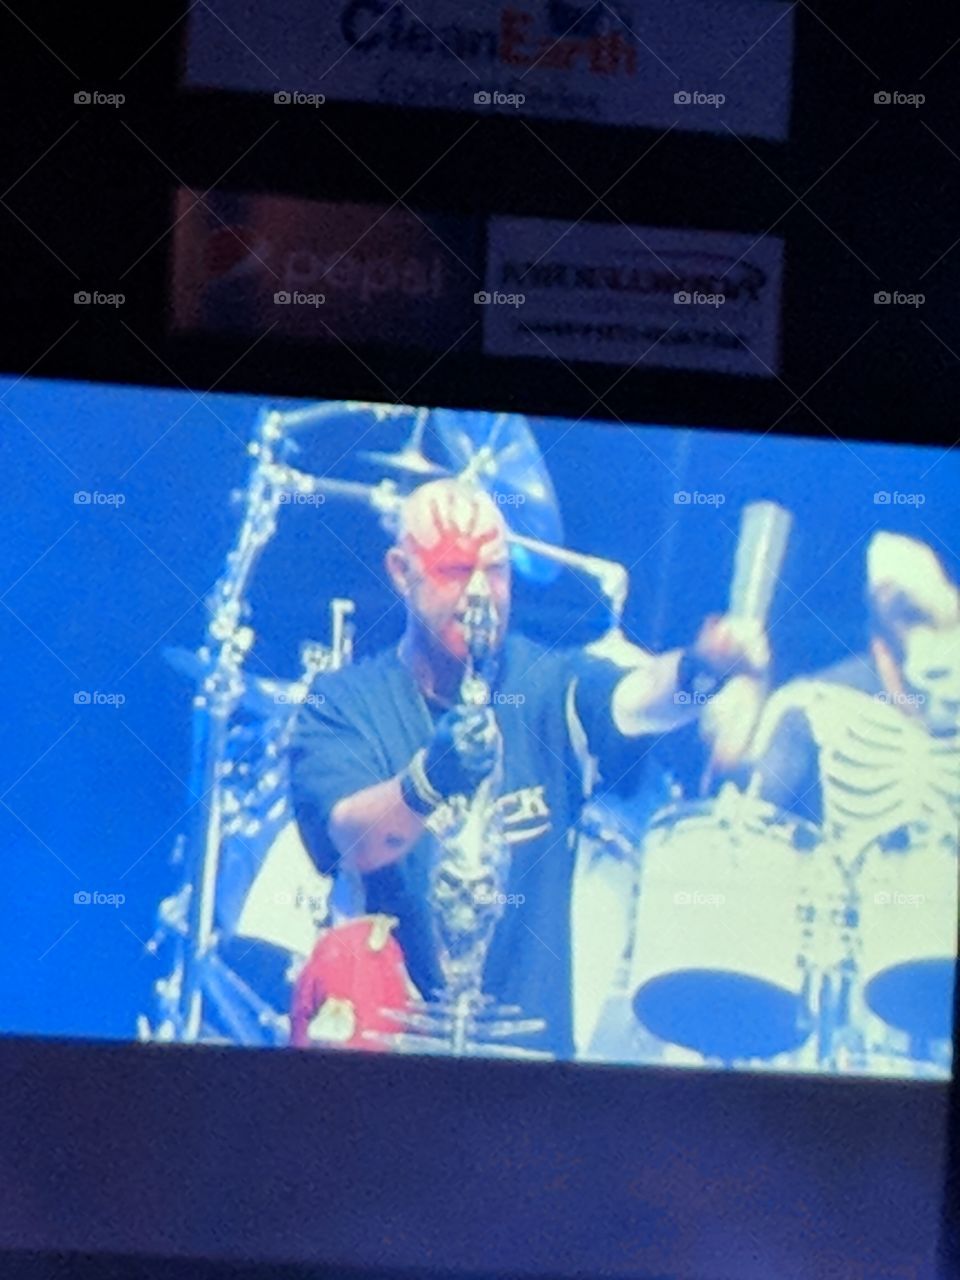 Ivan Moody from Five Finger Death Punch on the big screen, at the 8-11-18 concert in Tampa, FL